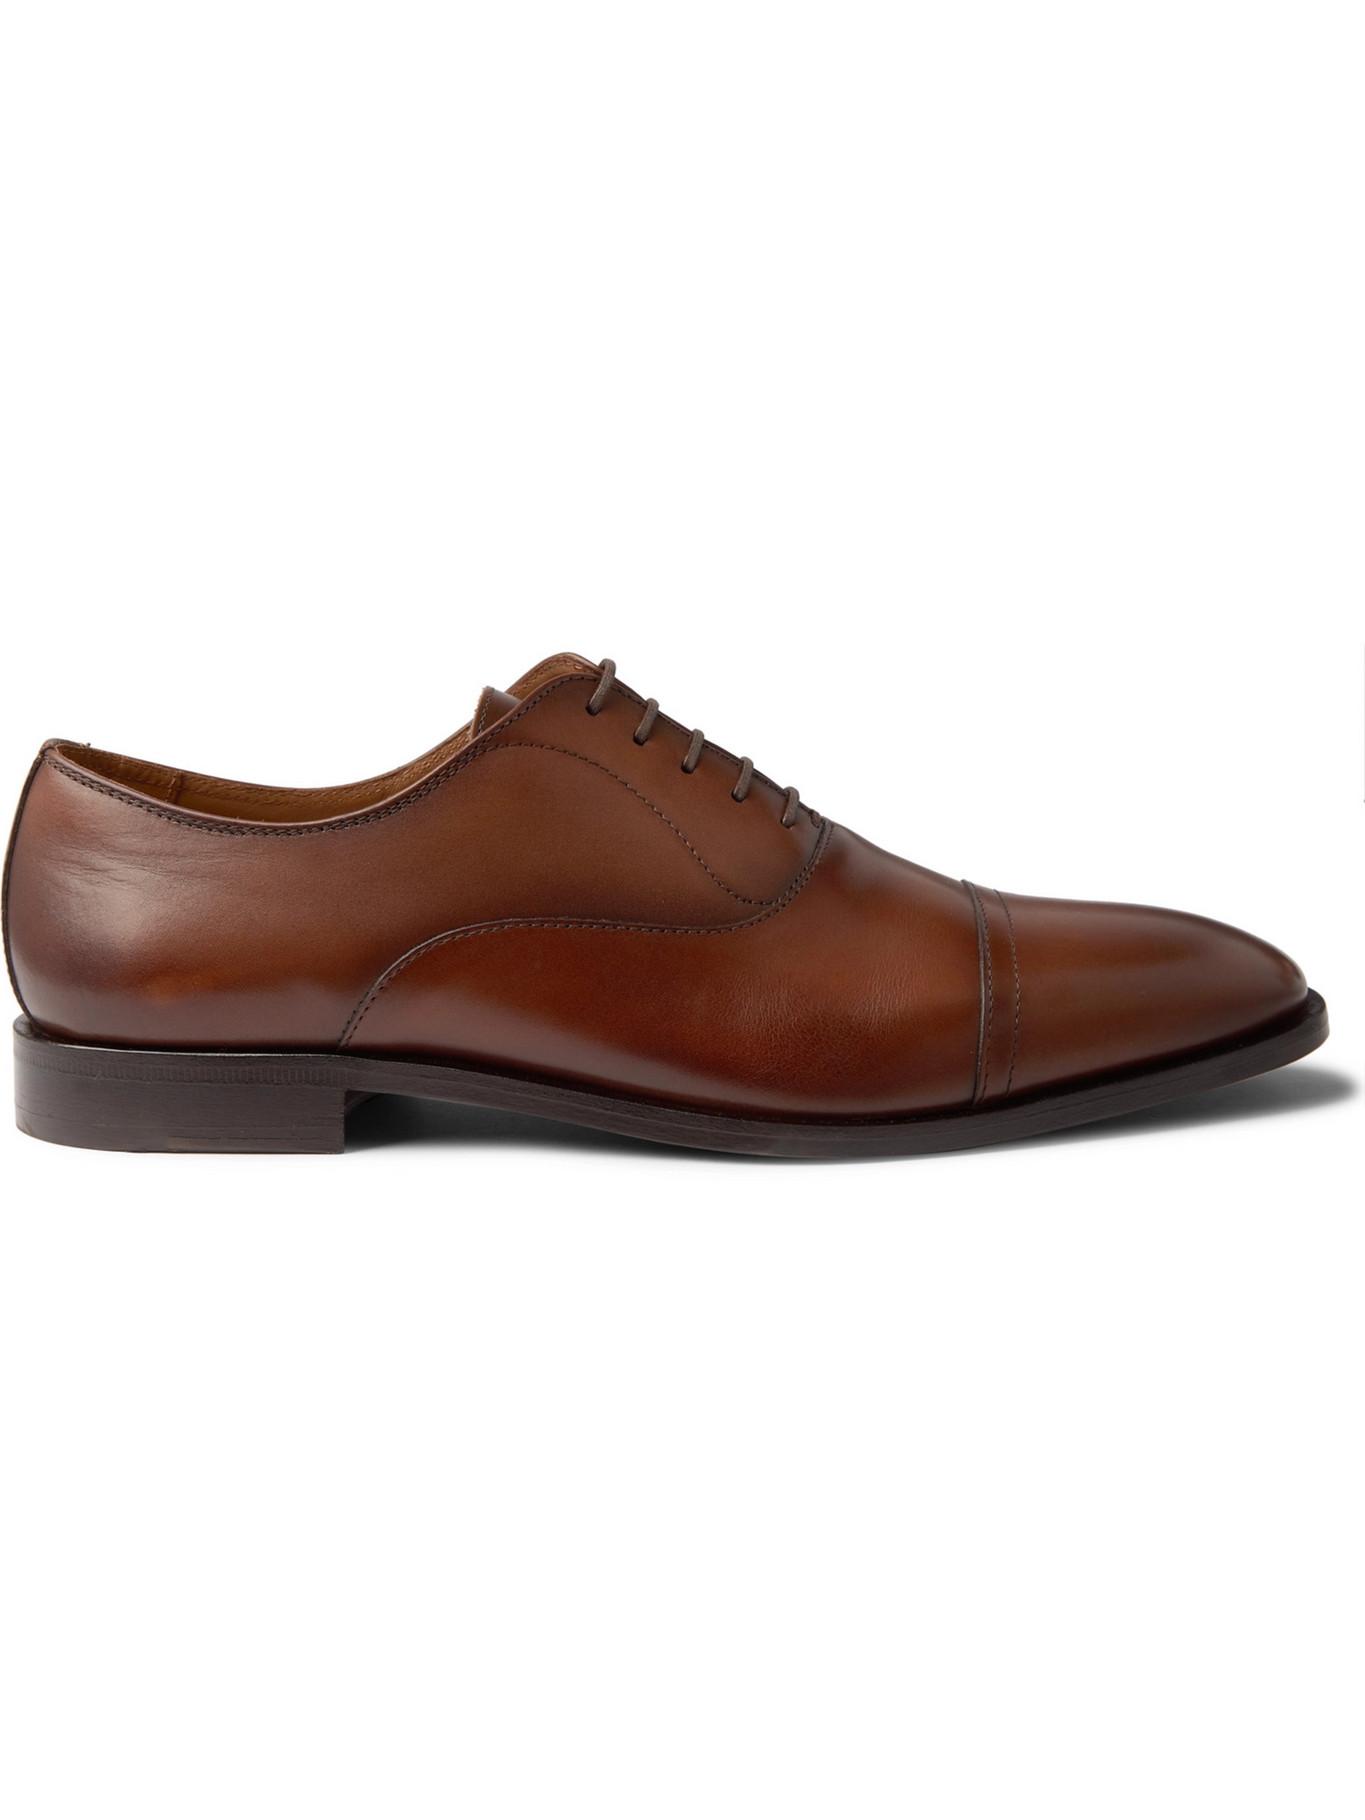 BOSS by HUGO BOSS Lisbon Cap-toe Burnished-leather Oxford Shoes in Brown  for Men | Lyst